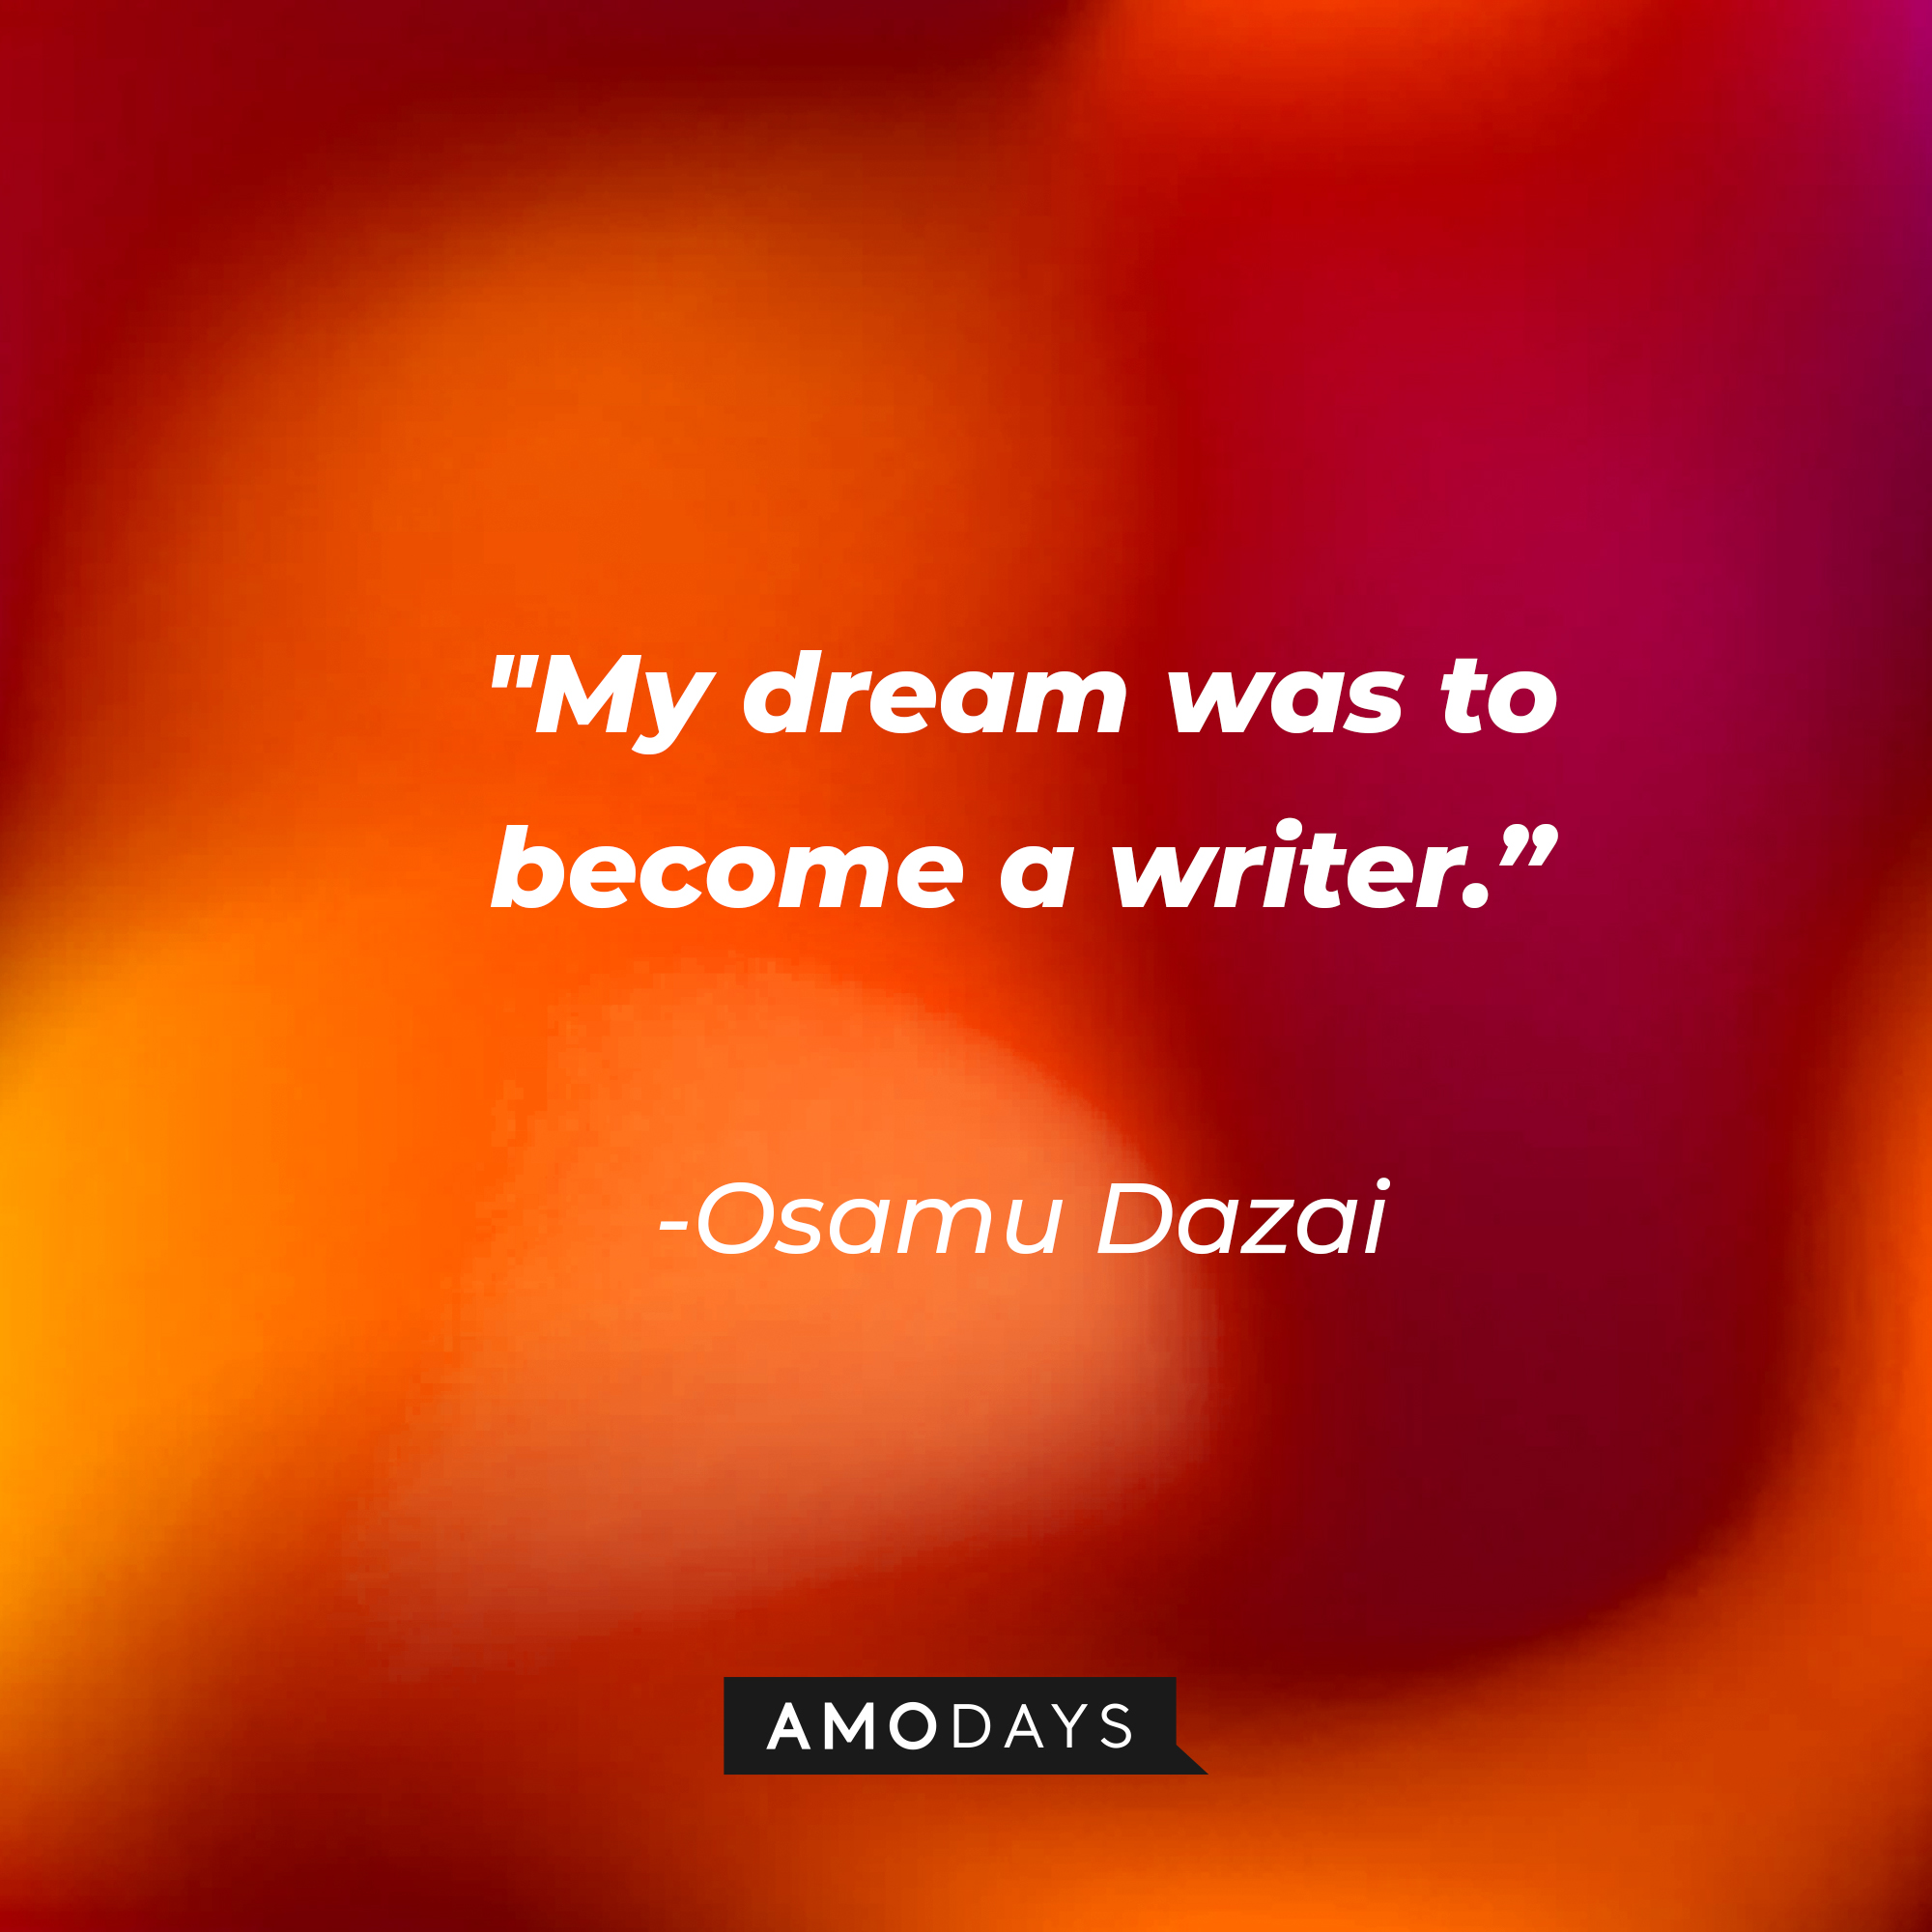 Osamu Dazai’s quote: "My dream was to become a writer.” | Source: AmoDays